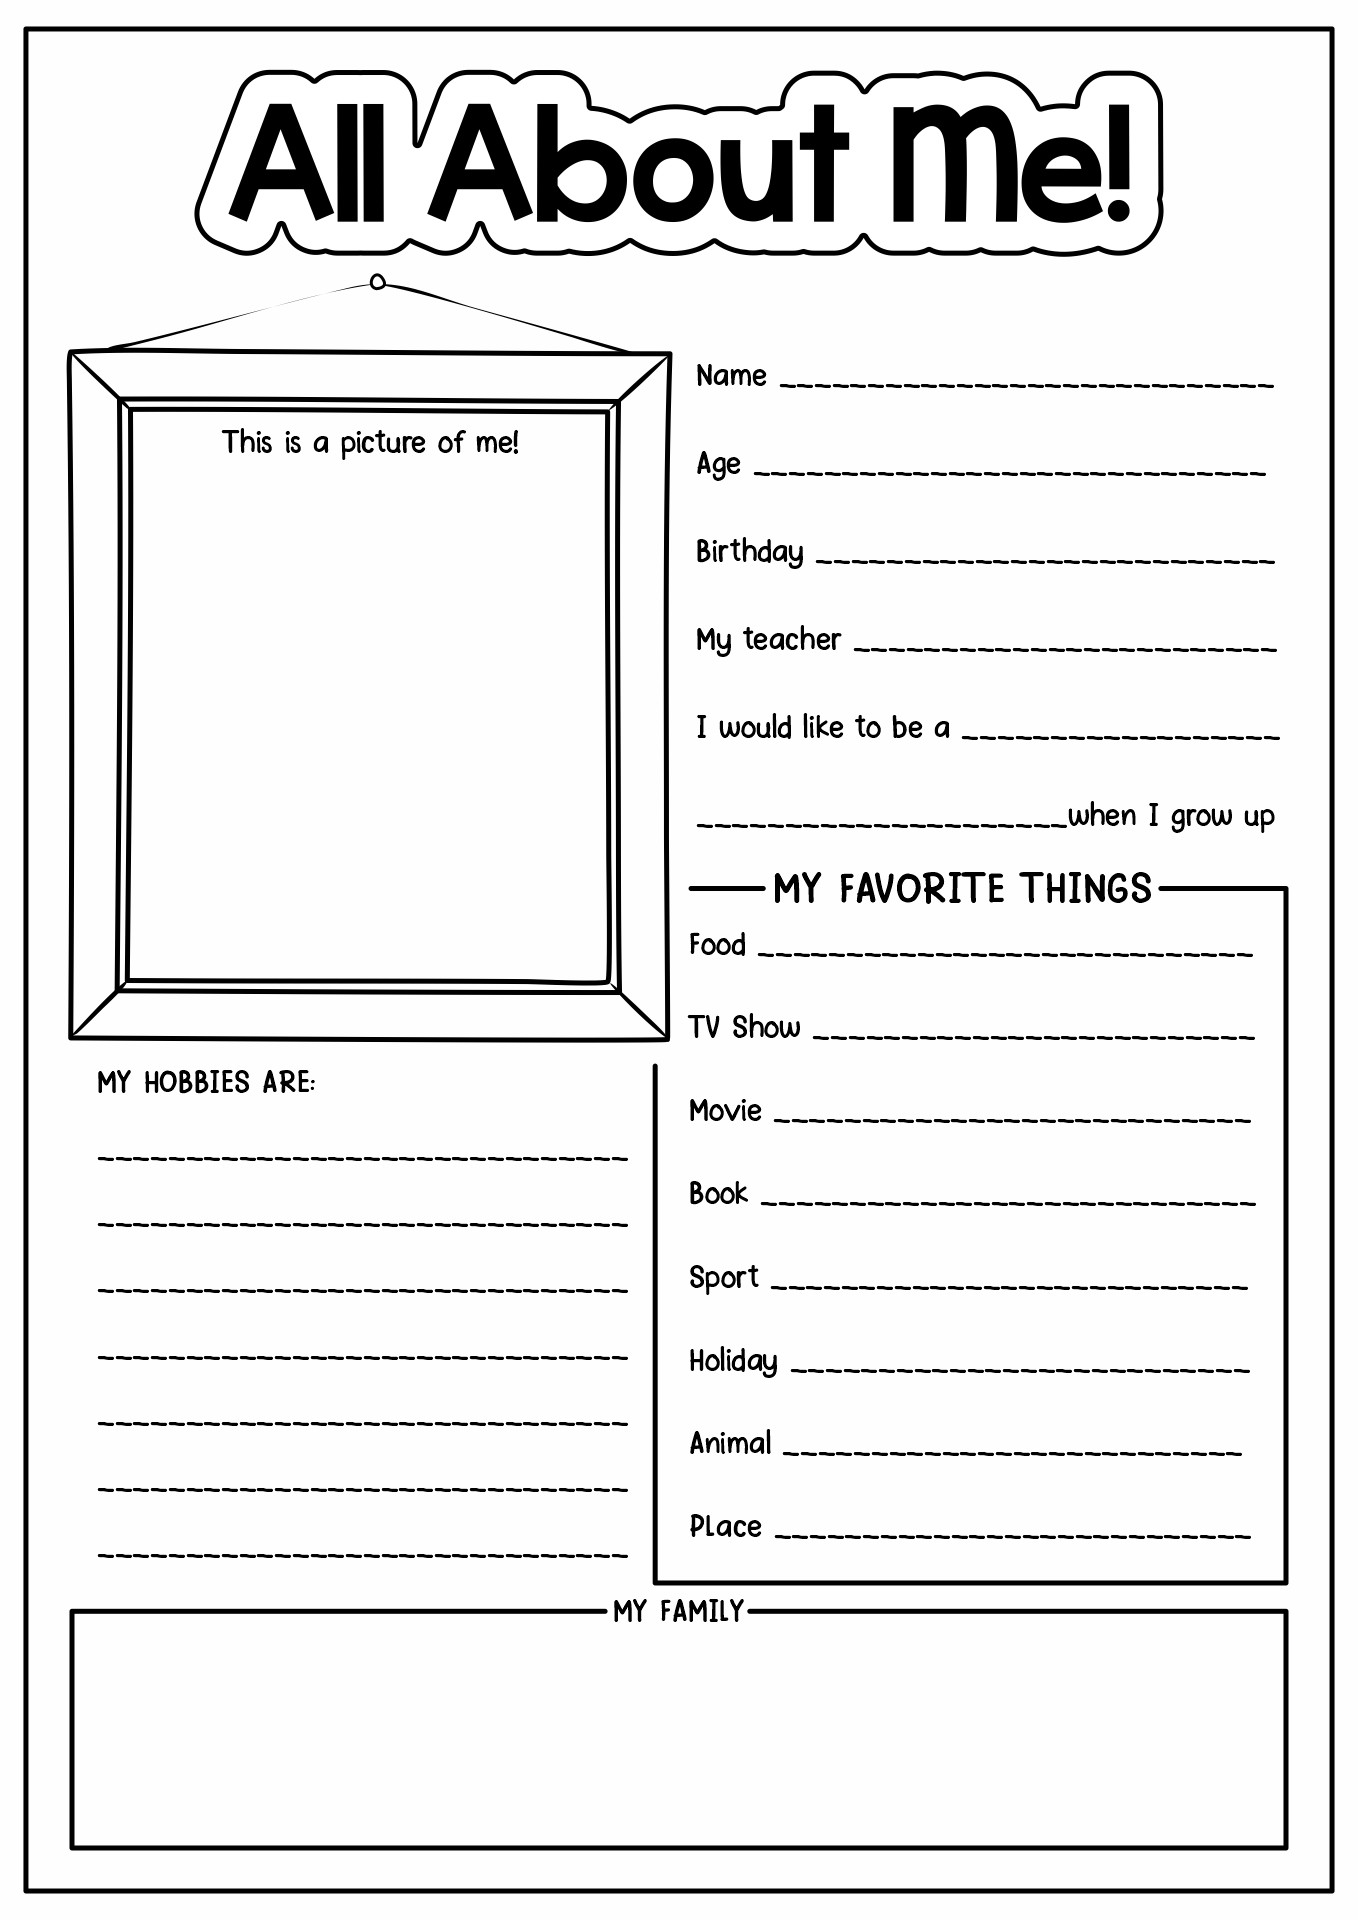 Free Back to School All About Me Activity Image